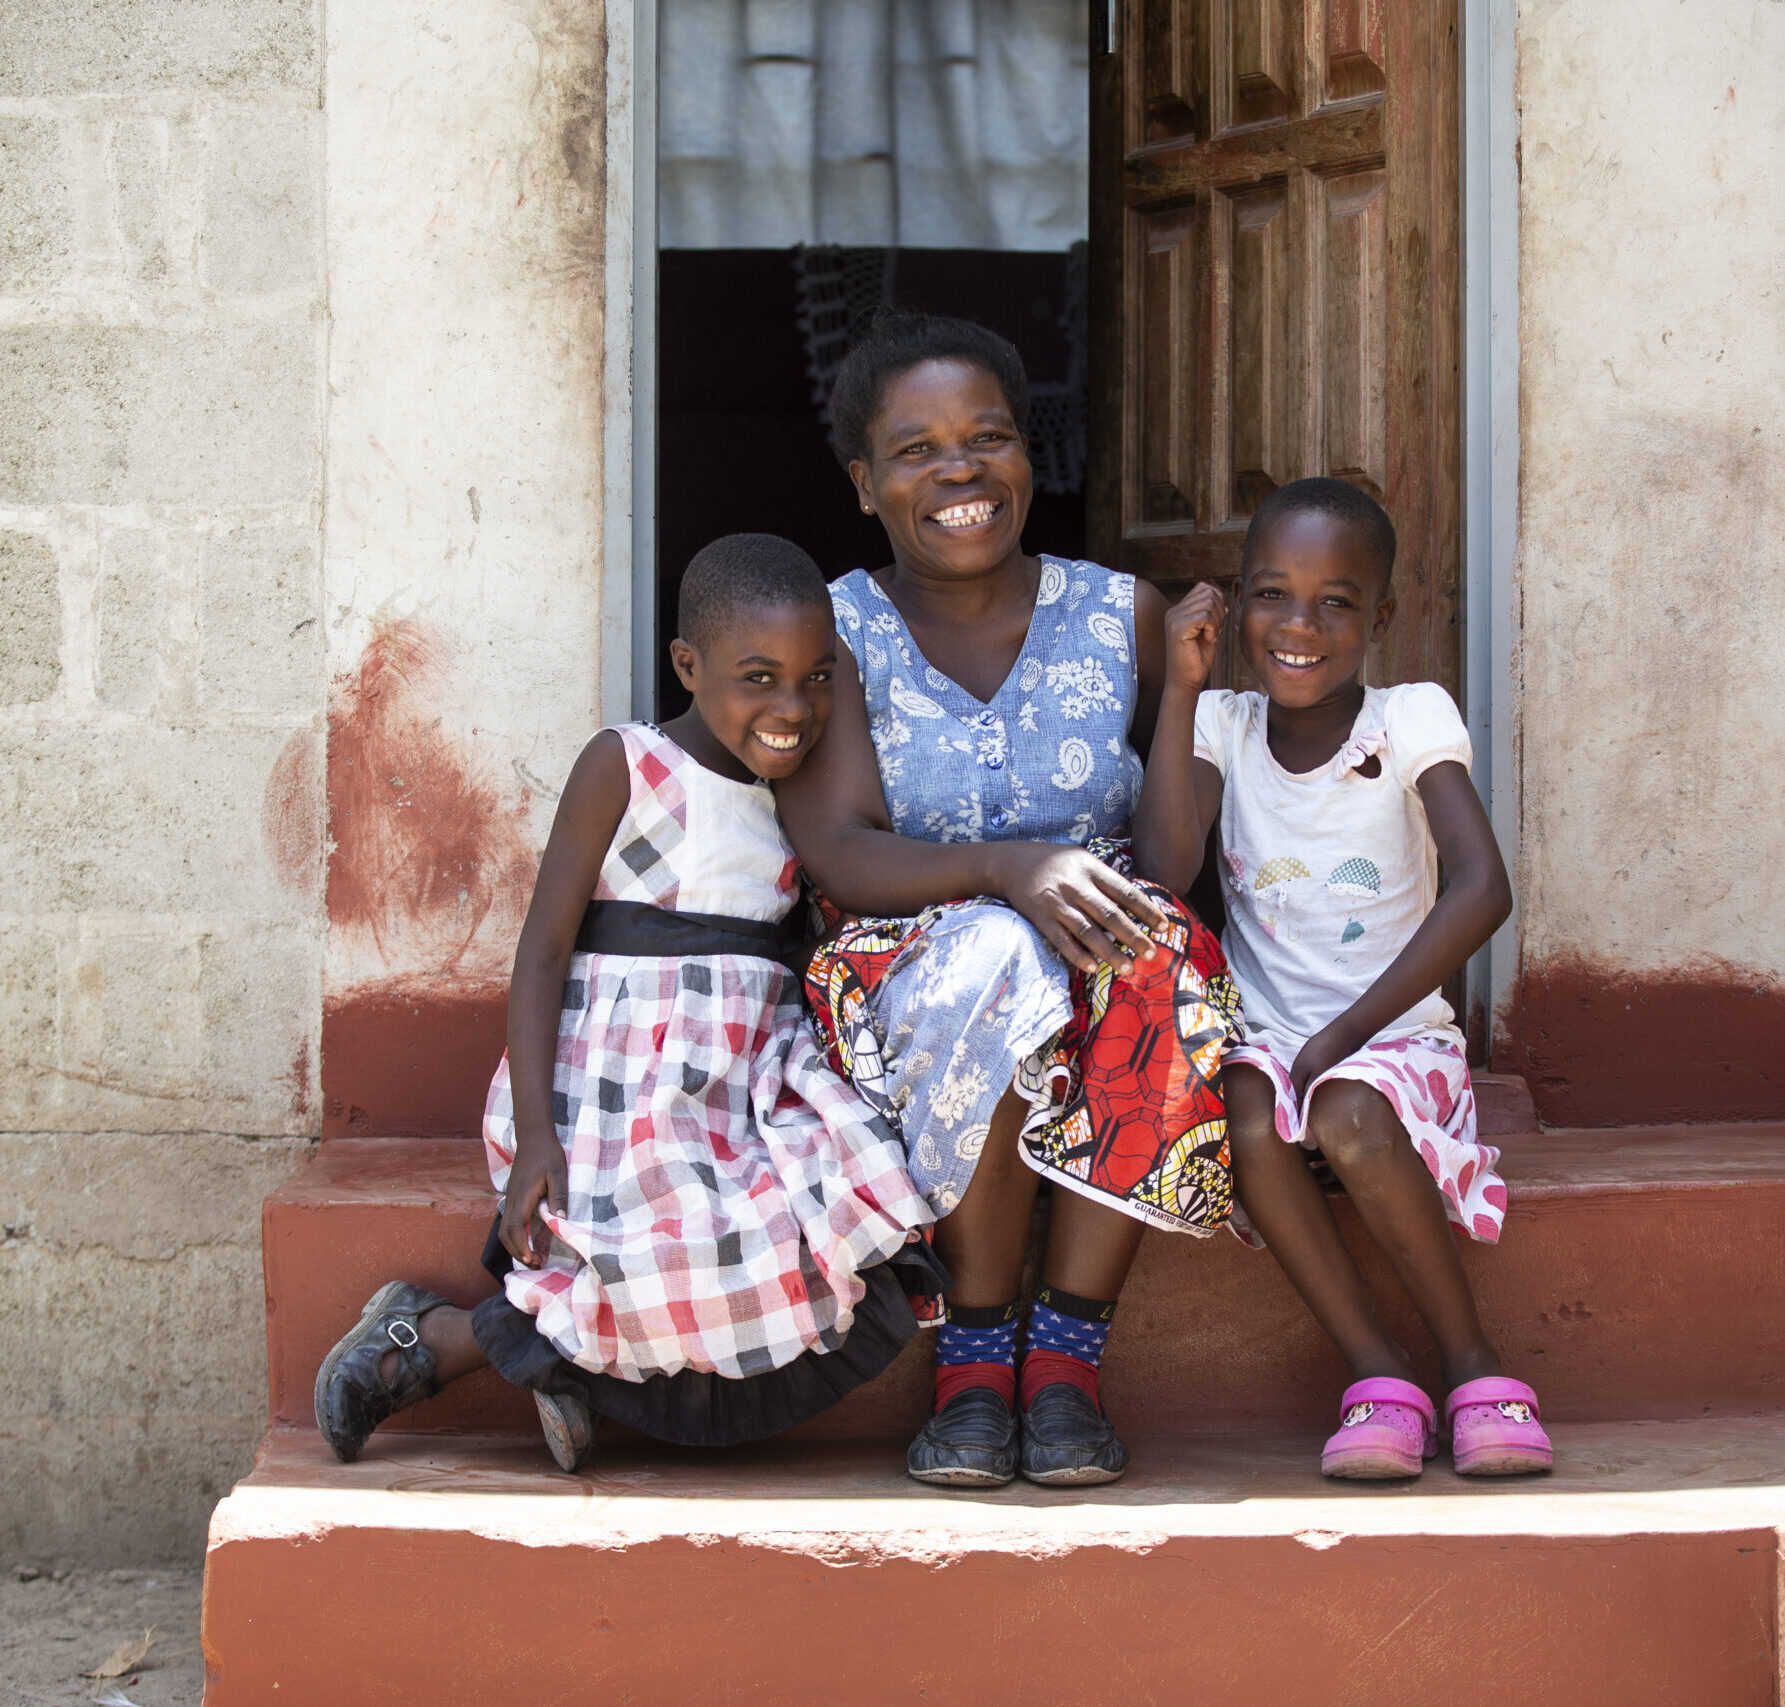 ZAMB-18-23067-AK.jpg
KABWE, ZAMBIA (10/24/2018) - Gertrude Zulu, 43, in front of her home in Makalulu with her twin daughters, Naomi (l) and Ruth (r), both age 8. The family sells tomatoes and charcoal from a small spot on the edge of their property to help bring in income. “It is a very strong house,” Gertrude says. “I never dreamed that I would have such a strong house.” Humanity International / Annalise Kaylor